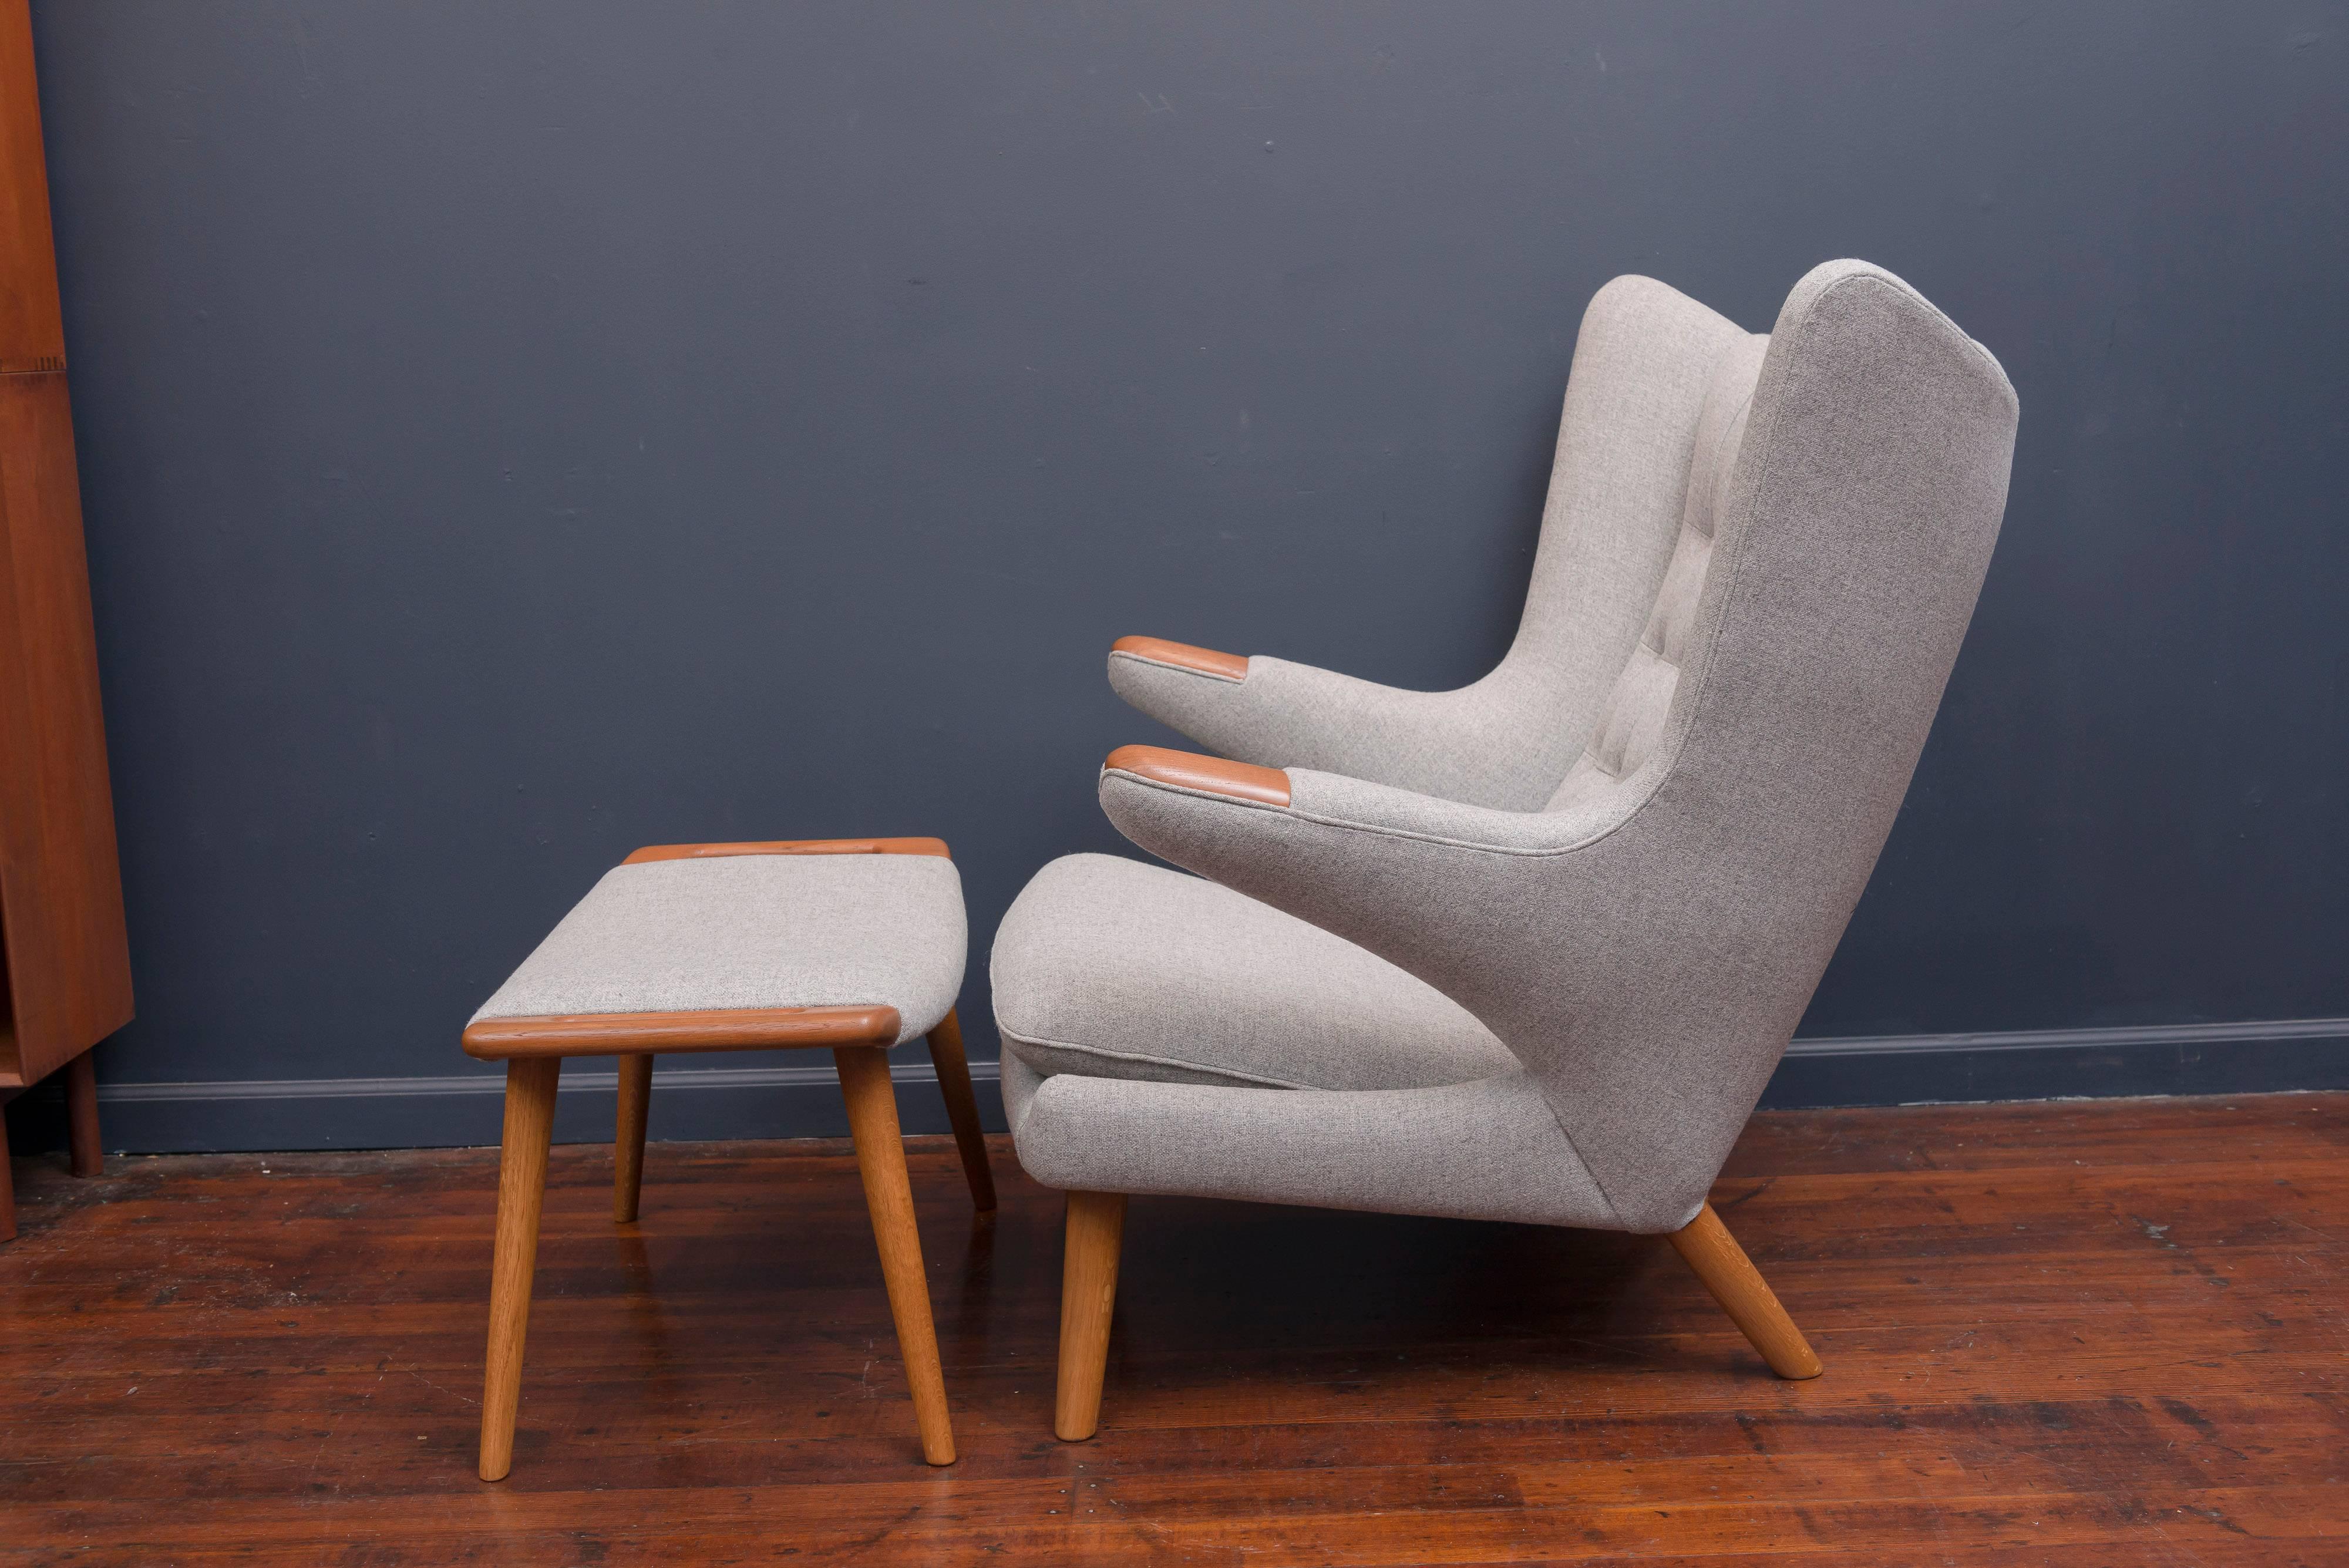 Perfectly restored Hans Wegner papa bear chair and ottoman newly refinished and upholstered in a light grey Danish wool. Simply the most comfortable chair you will ever own.